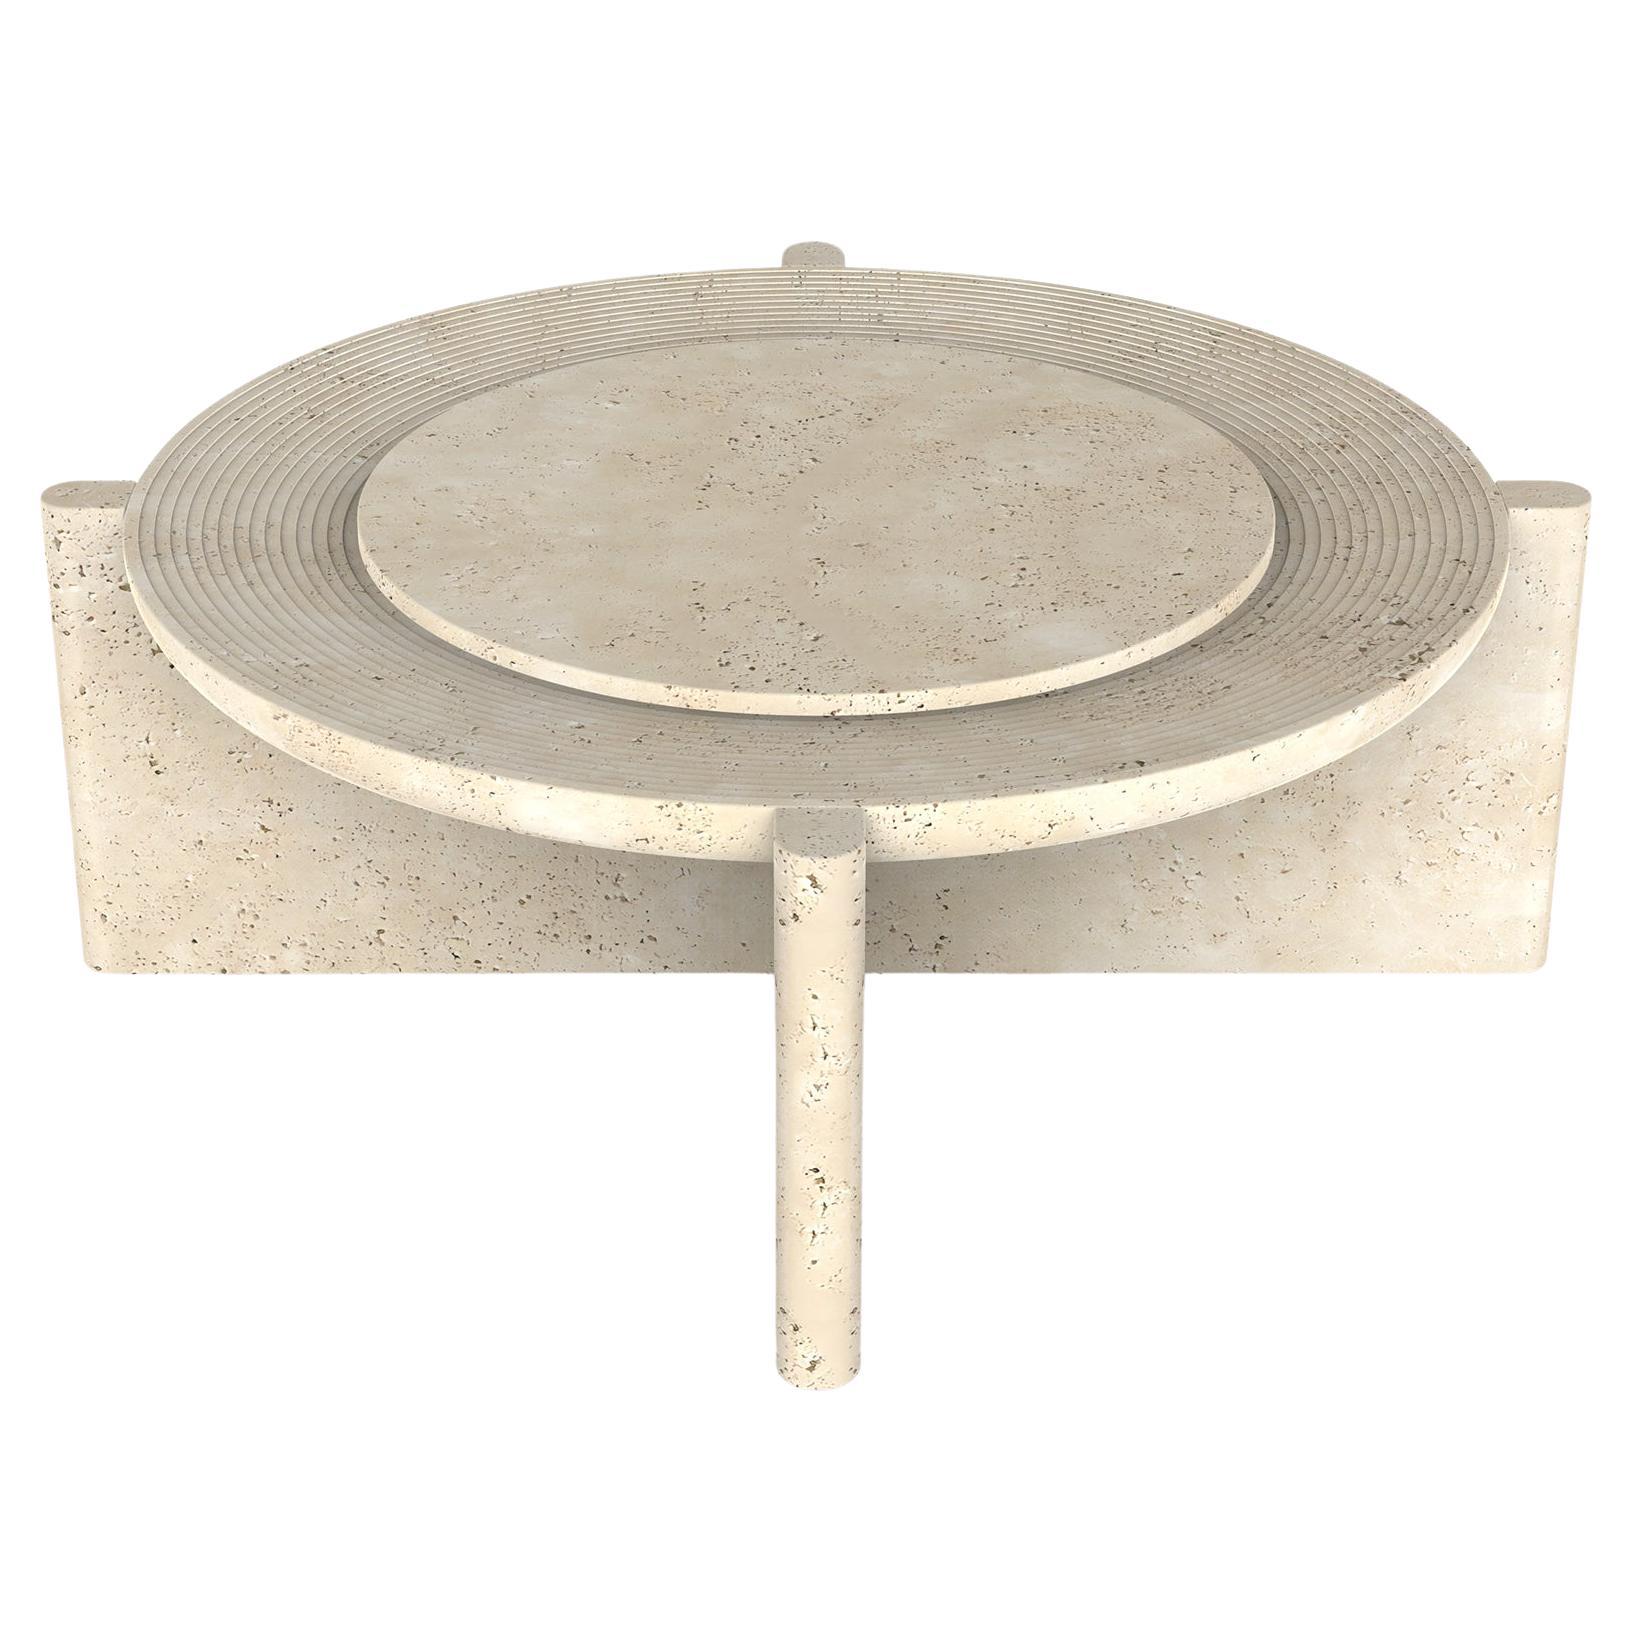 Arkhe No 2 Coffee Table Travertine, Modern Sculptural Round by Fulden Topaloglu For Sale